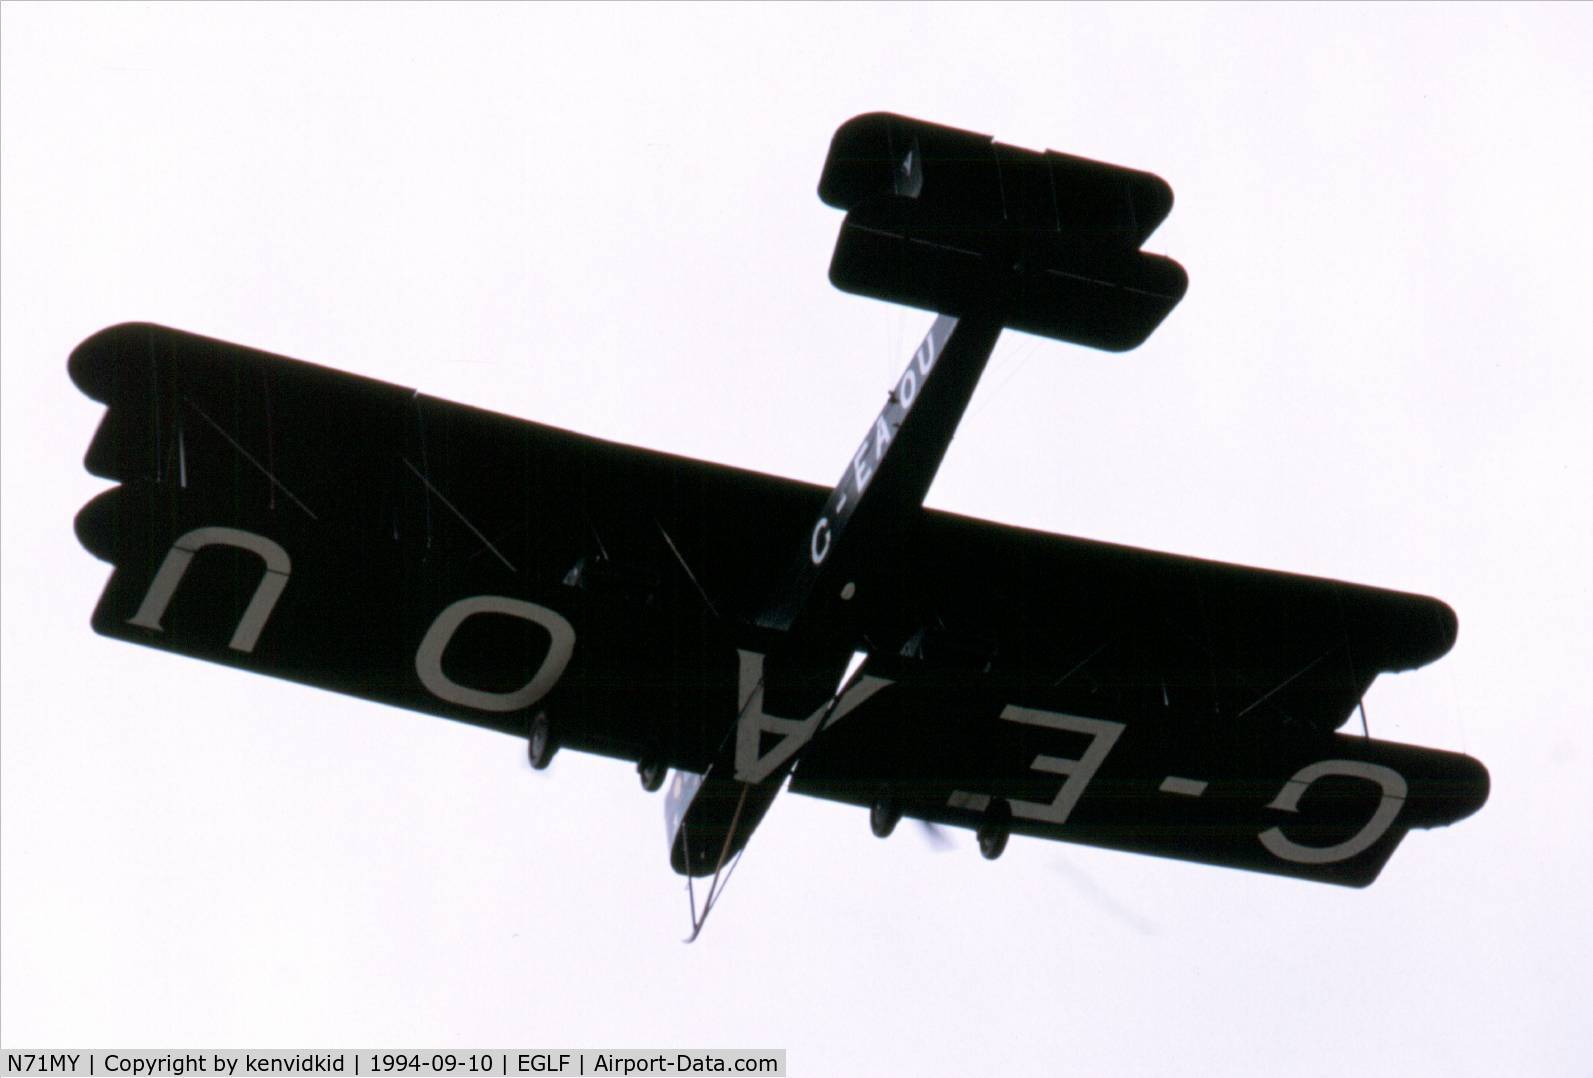 N71MY, 1994 Vickers FB-27A Vimy (replica) C/N 01, At the 1994 Farnborough International Air Show. Scanned from slide.